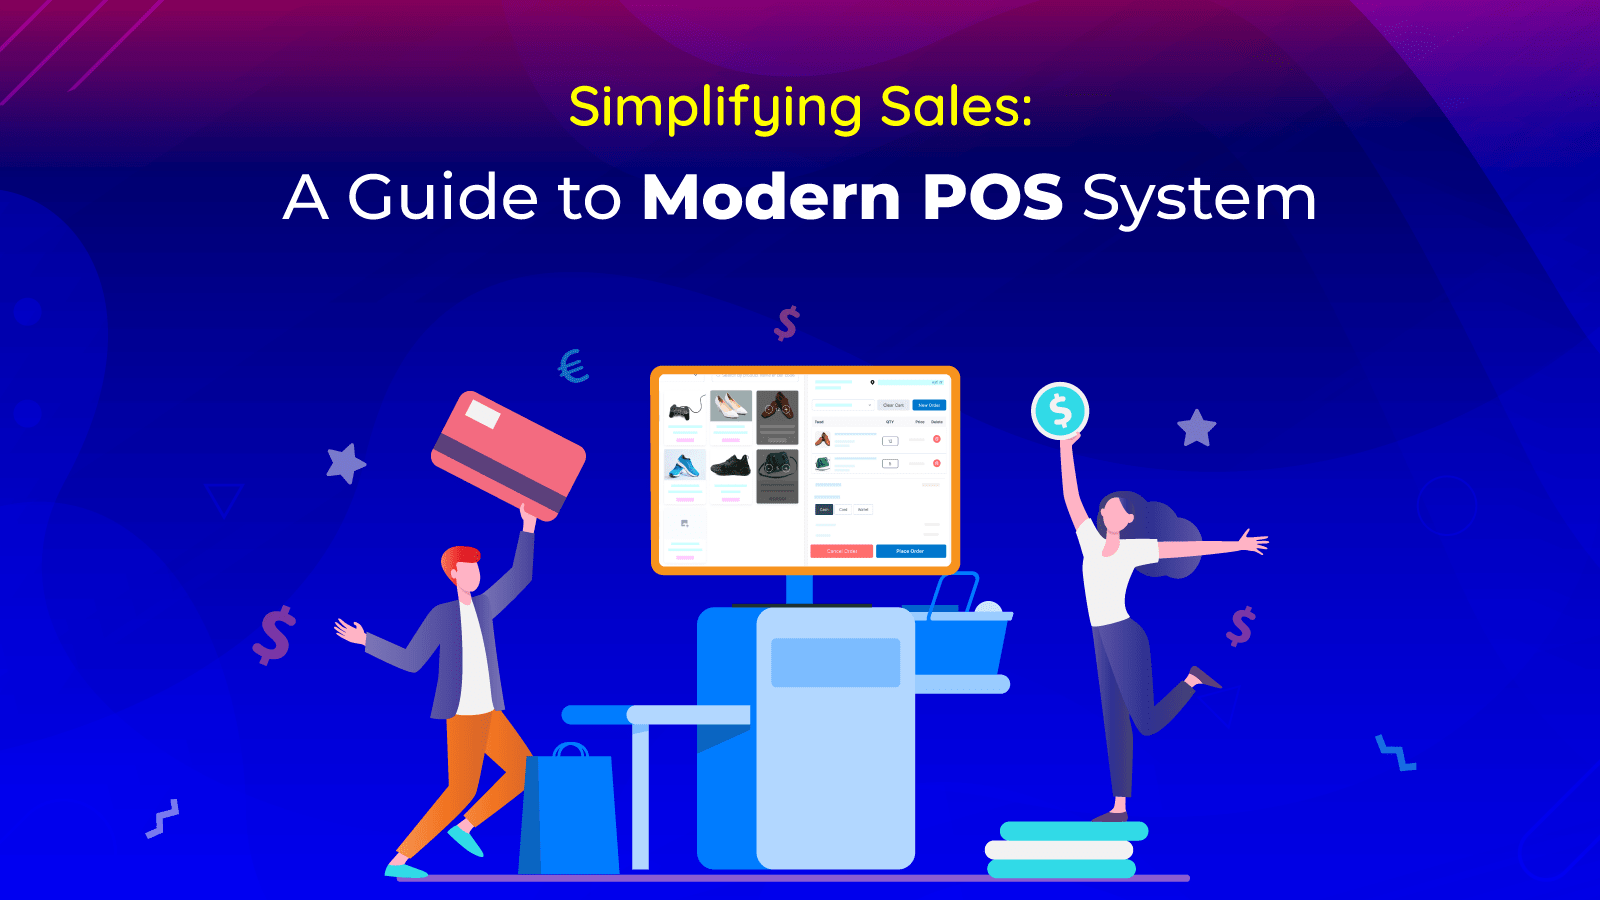 A Guide to Modern POS System